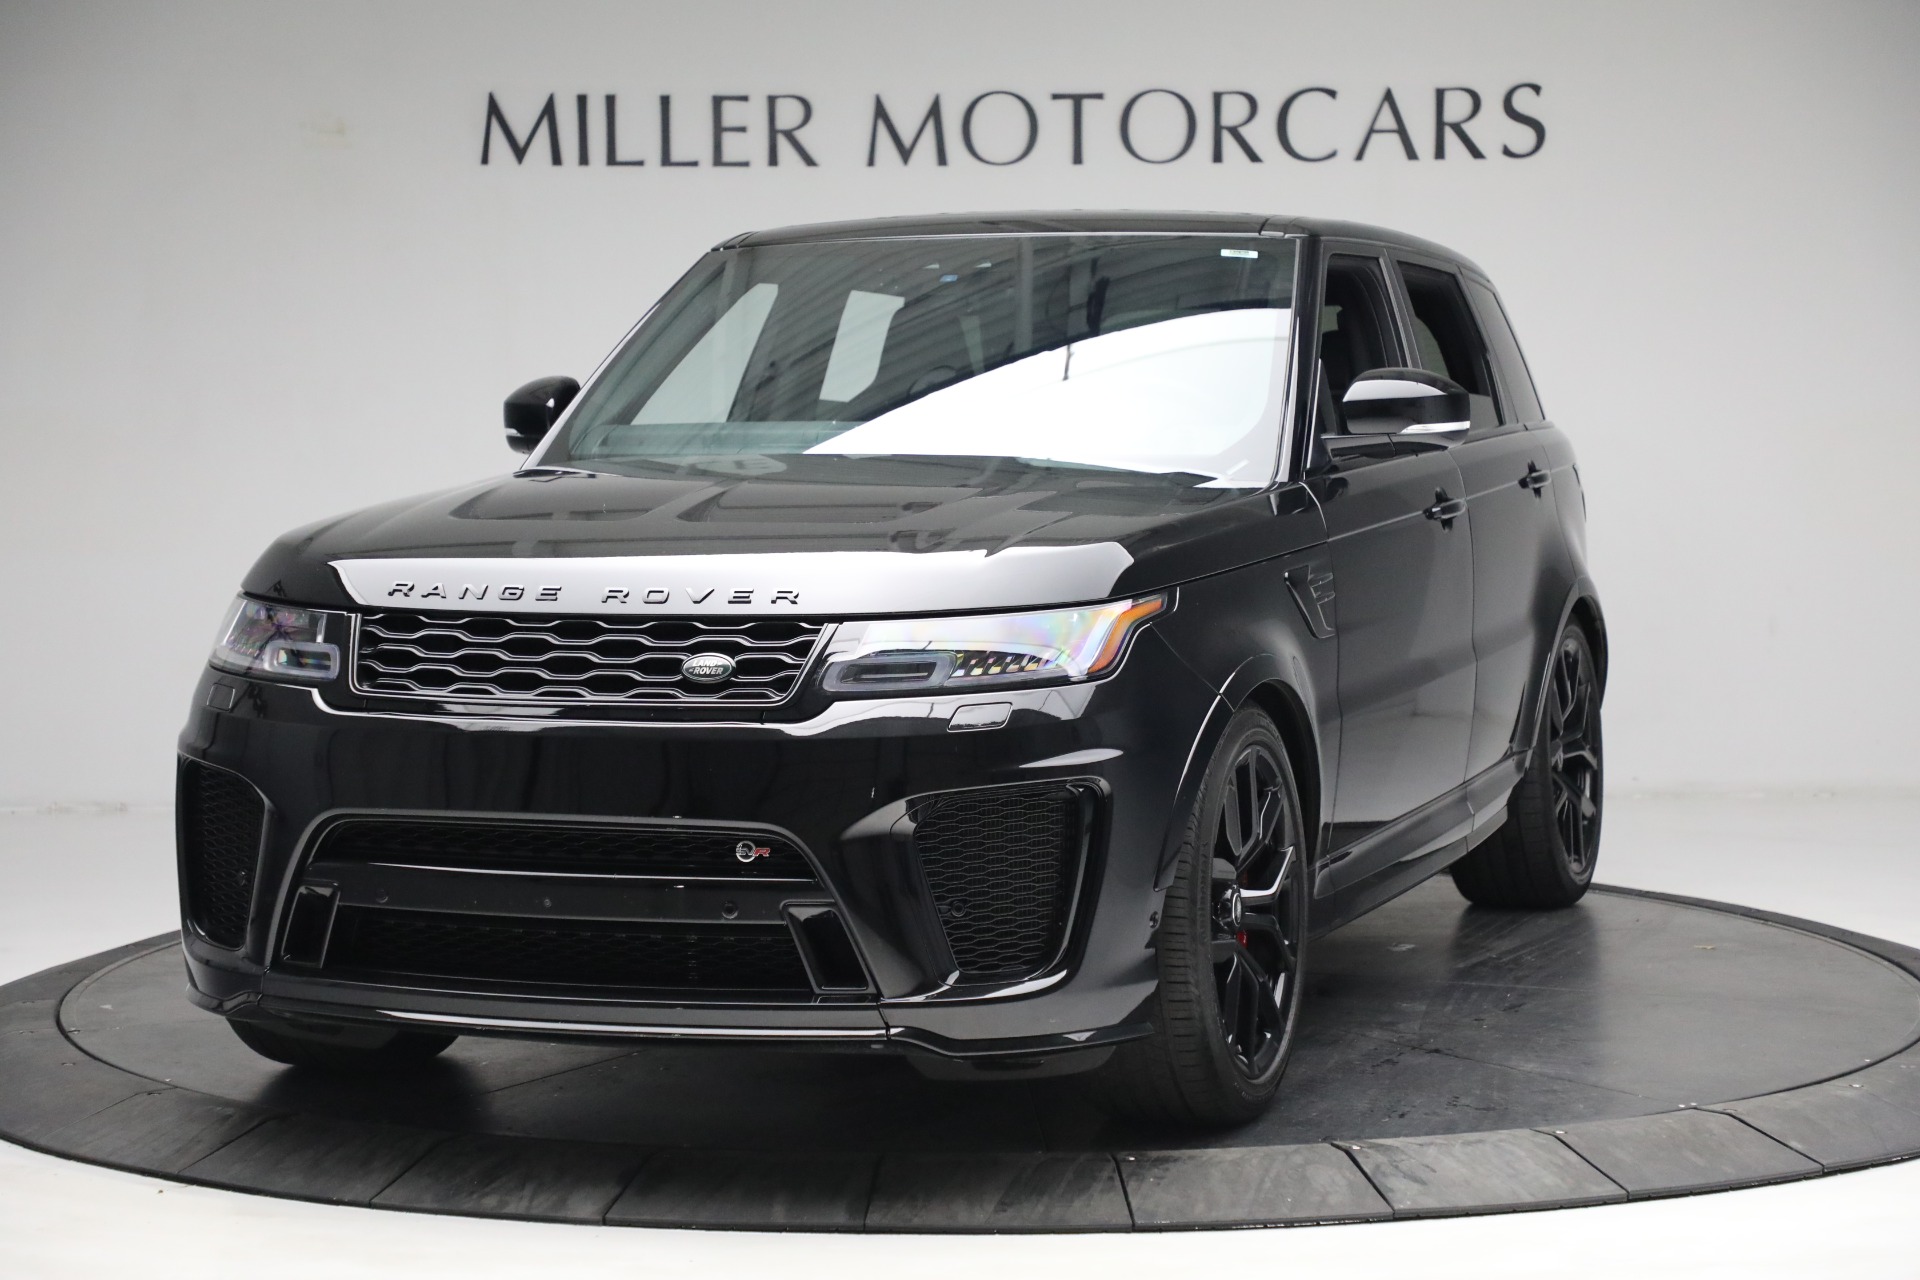 Used 2020 Land Rover Range Rover Sport SVR for sale $113,900 at Aston Martin of Greenwich in Greenwich CT 06830 1